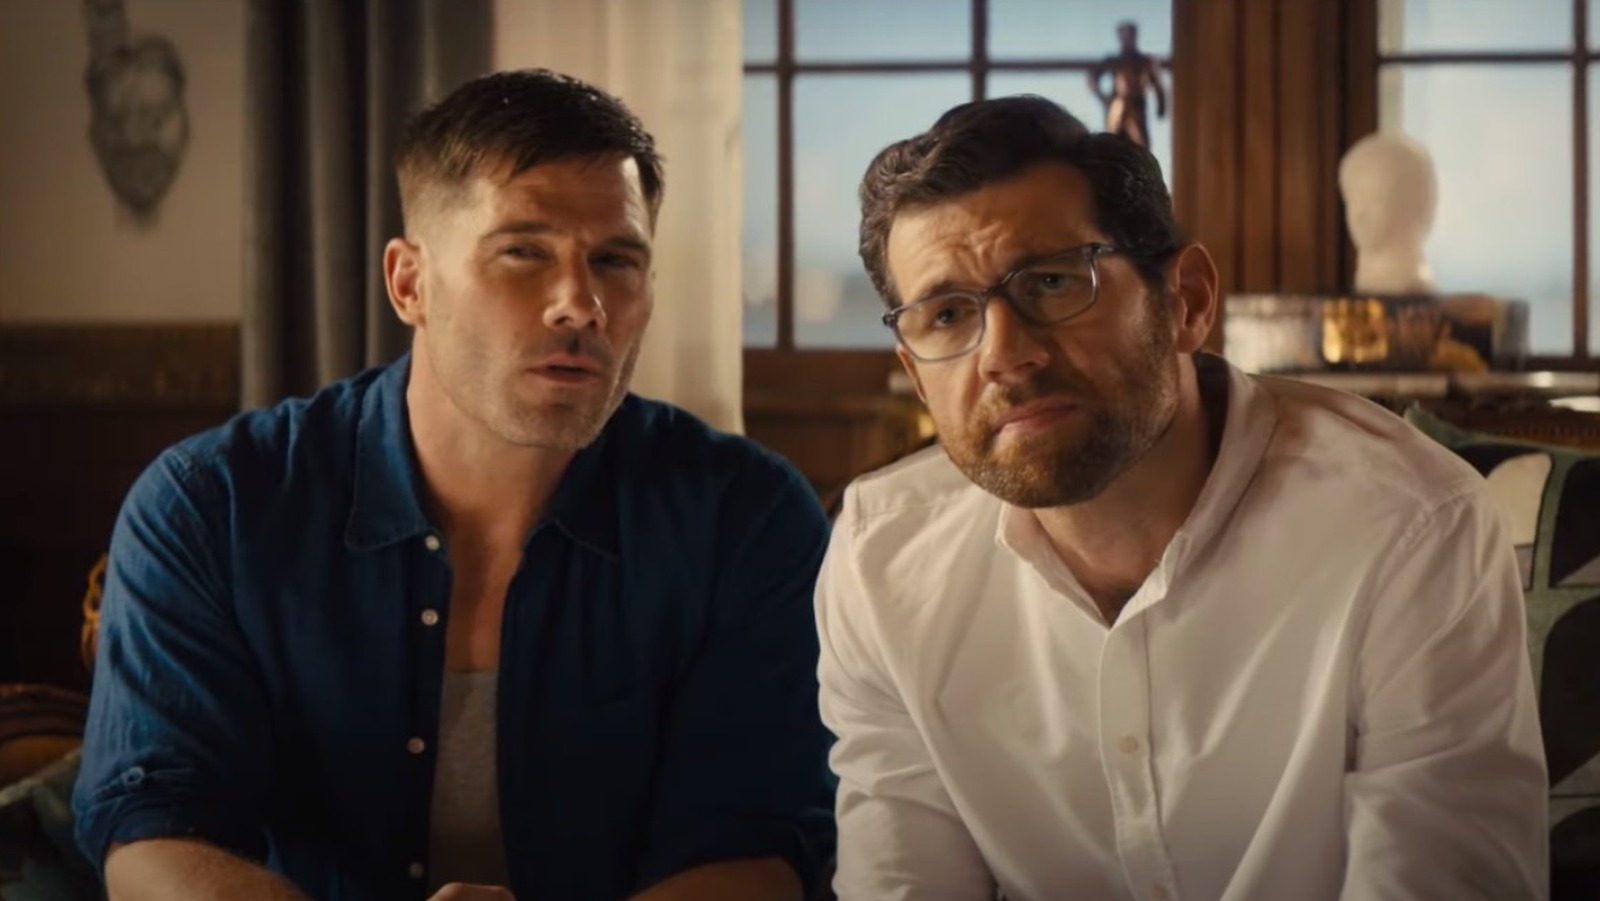 Bros Trailer: The First Ever Gay Rom-Com From A Major Studio Arrives